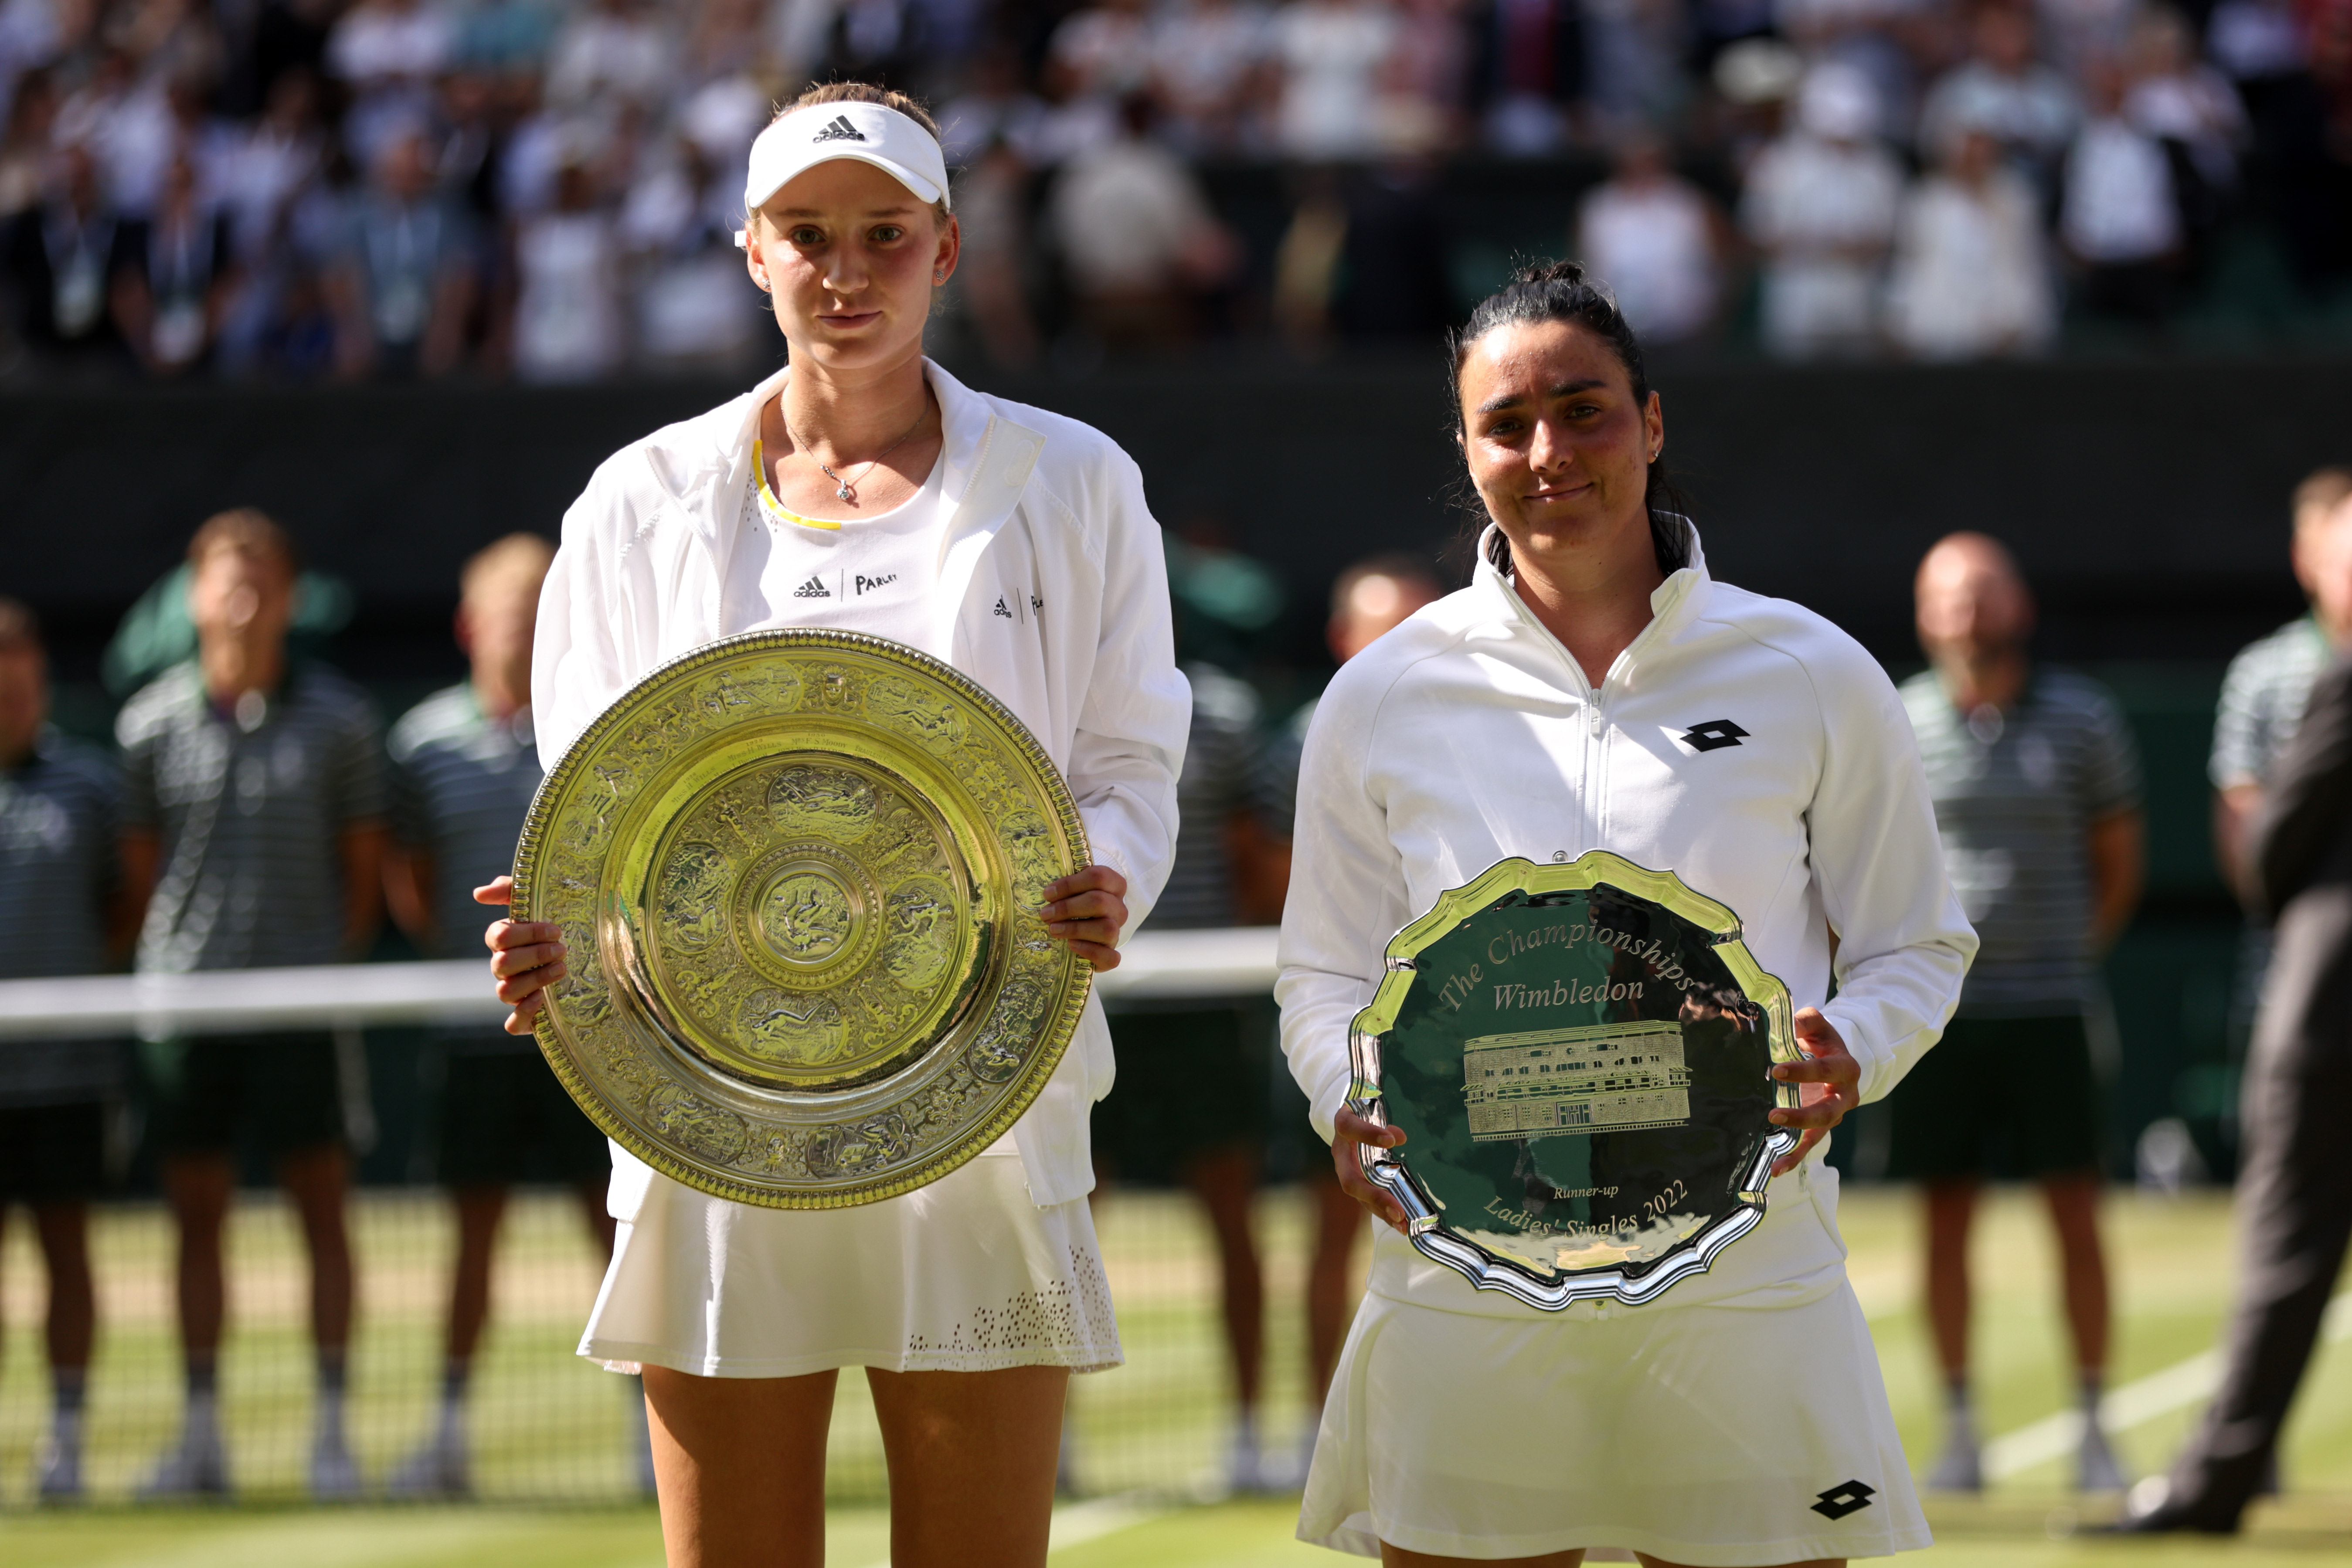 Elena Rybakina From nervous wreck to Wimbledon champion in under two hours